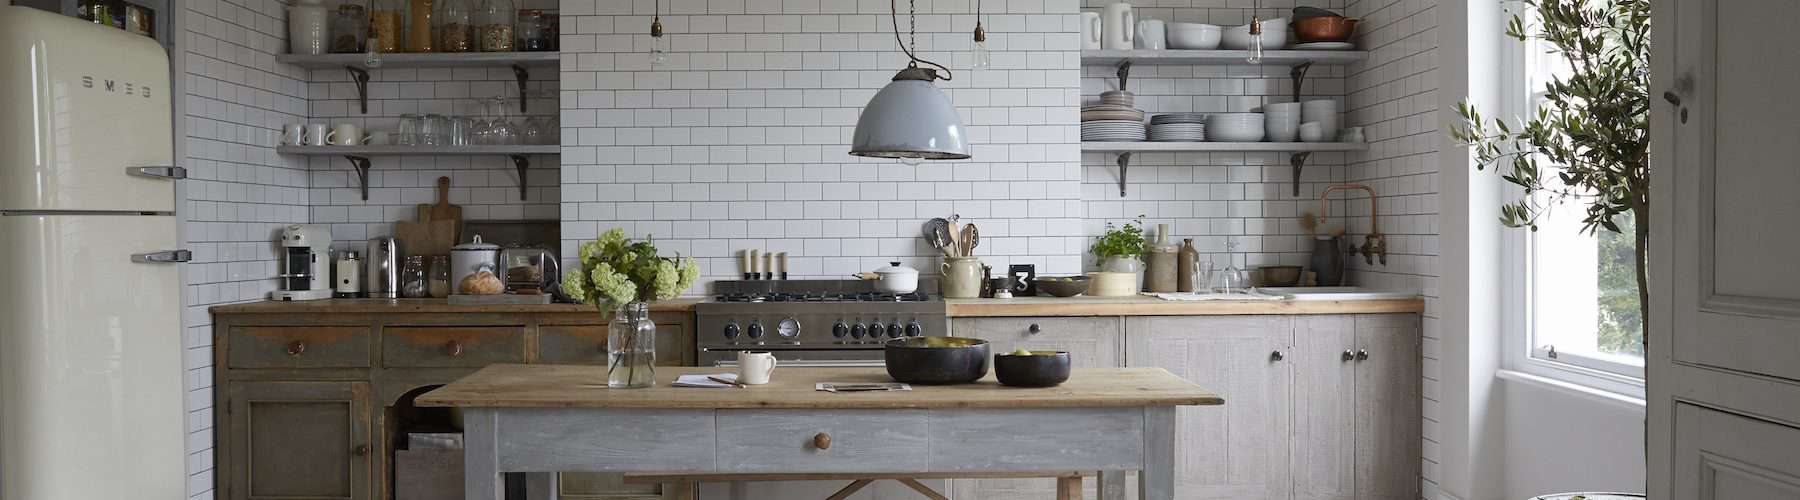 Painted Kitchen Makeovers - Home Trends Magazine